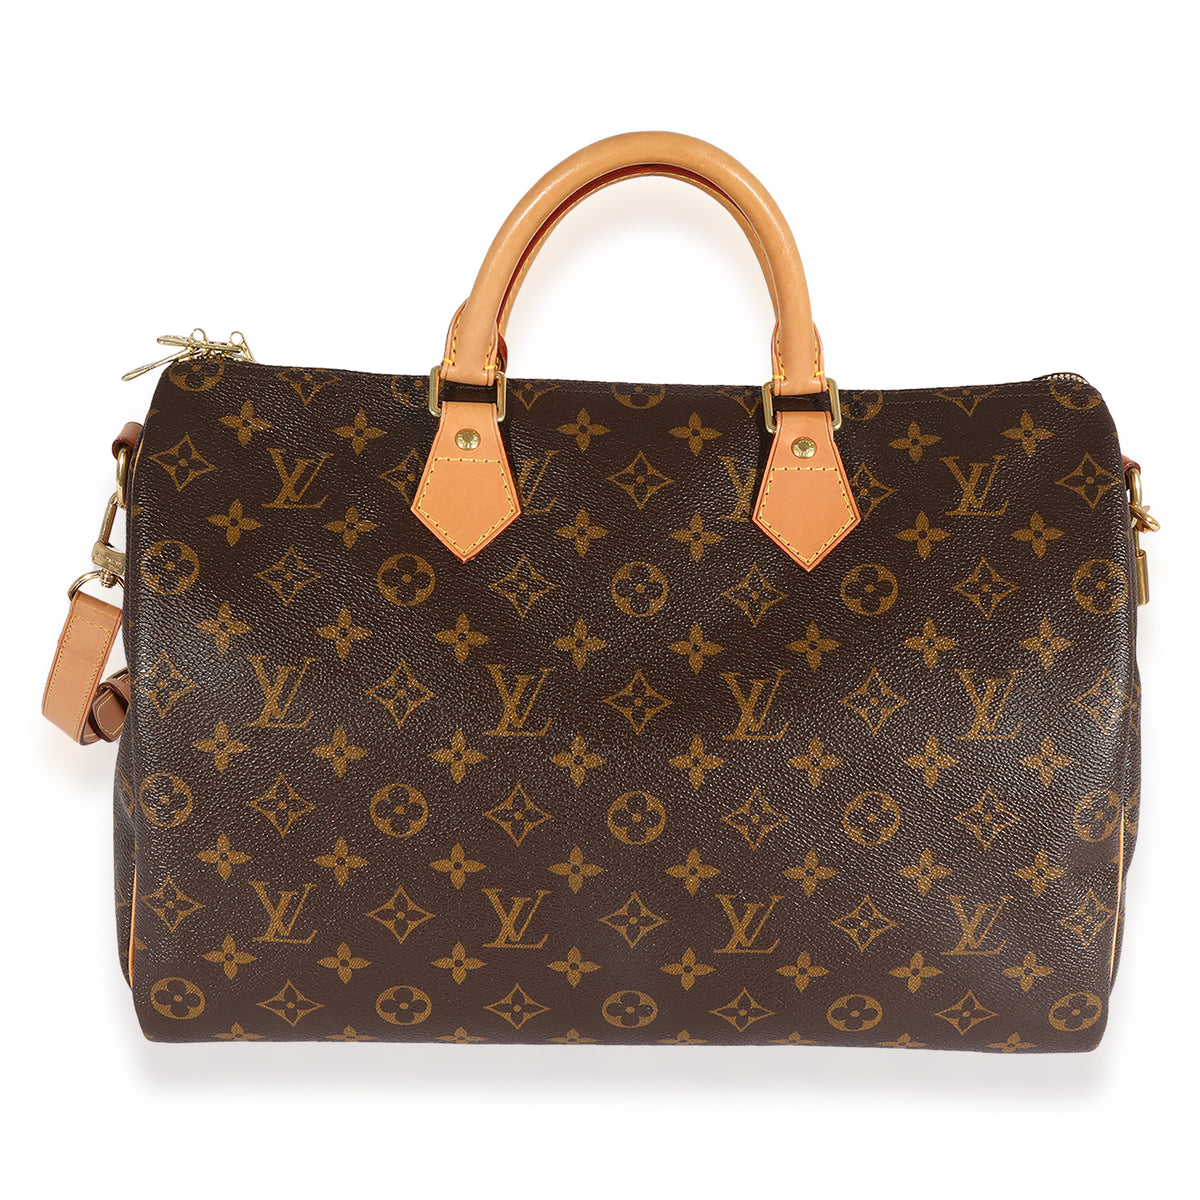 My very own Louis Vuitton Speedy Bandouliere 35 in Monogram with